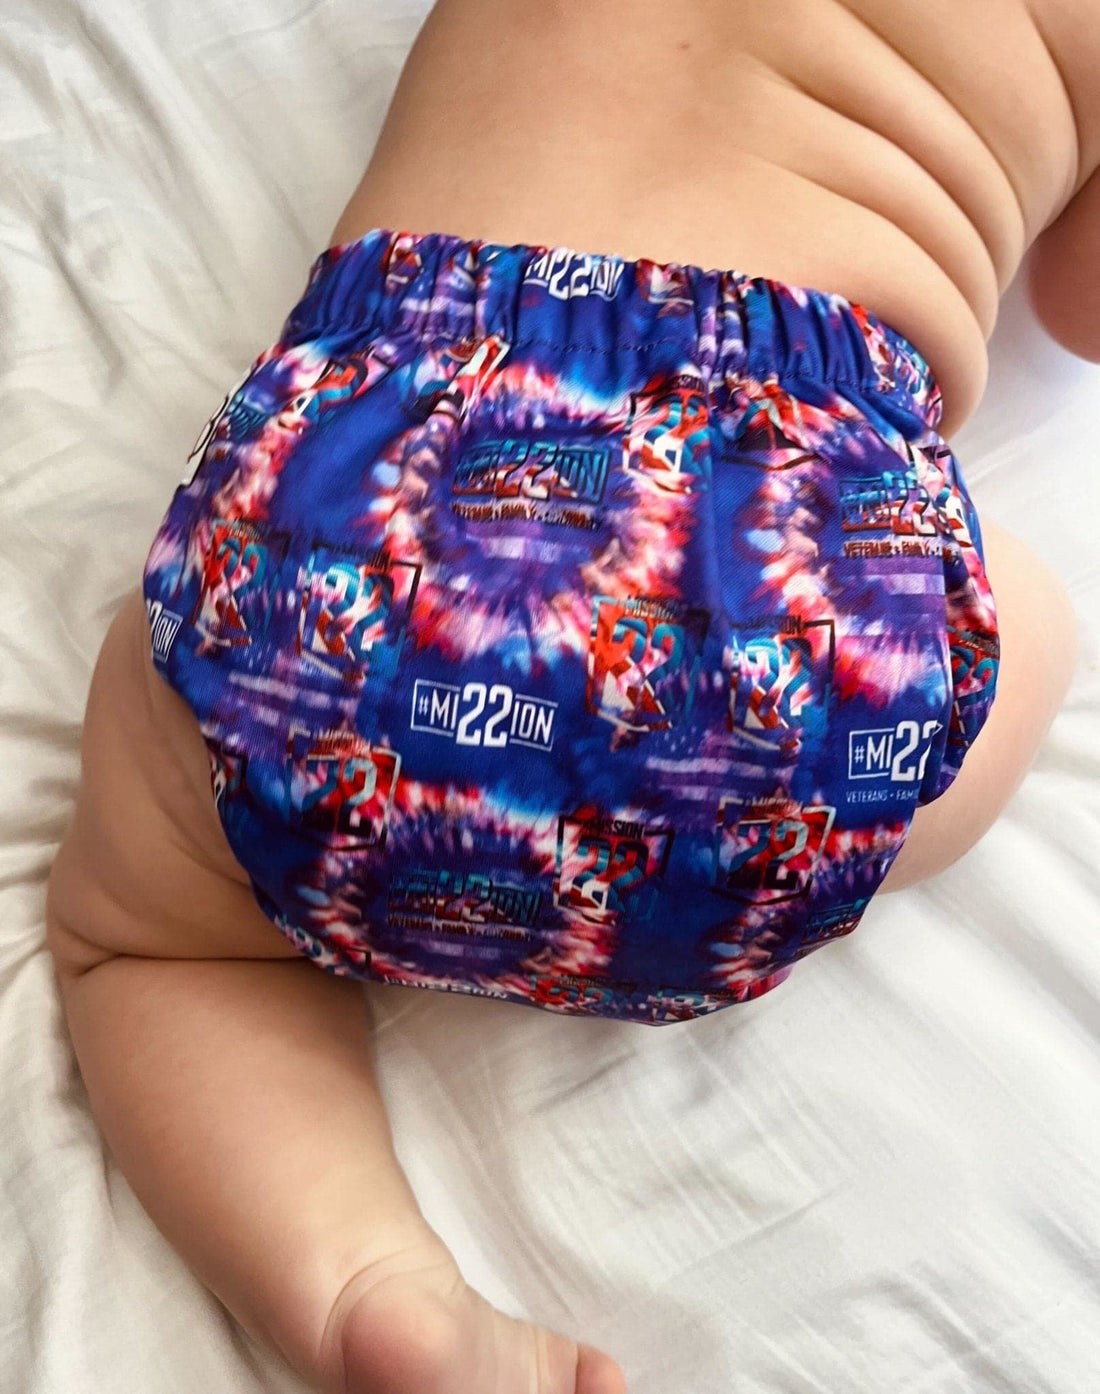 Mission 22 - Signature Cloth Diaper (excluded from all promo codes and sales) - Veteran Baby BrigadeCloth diaper